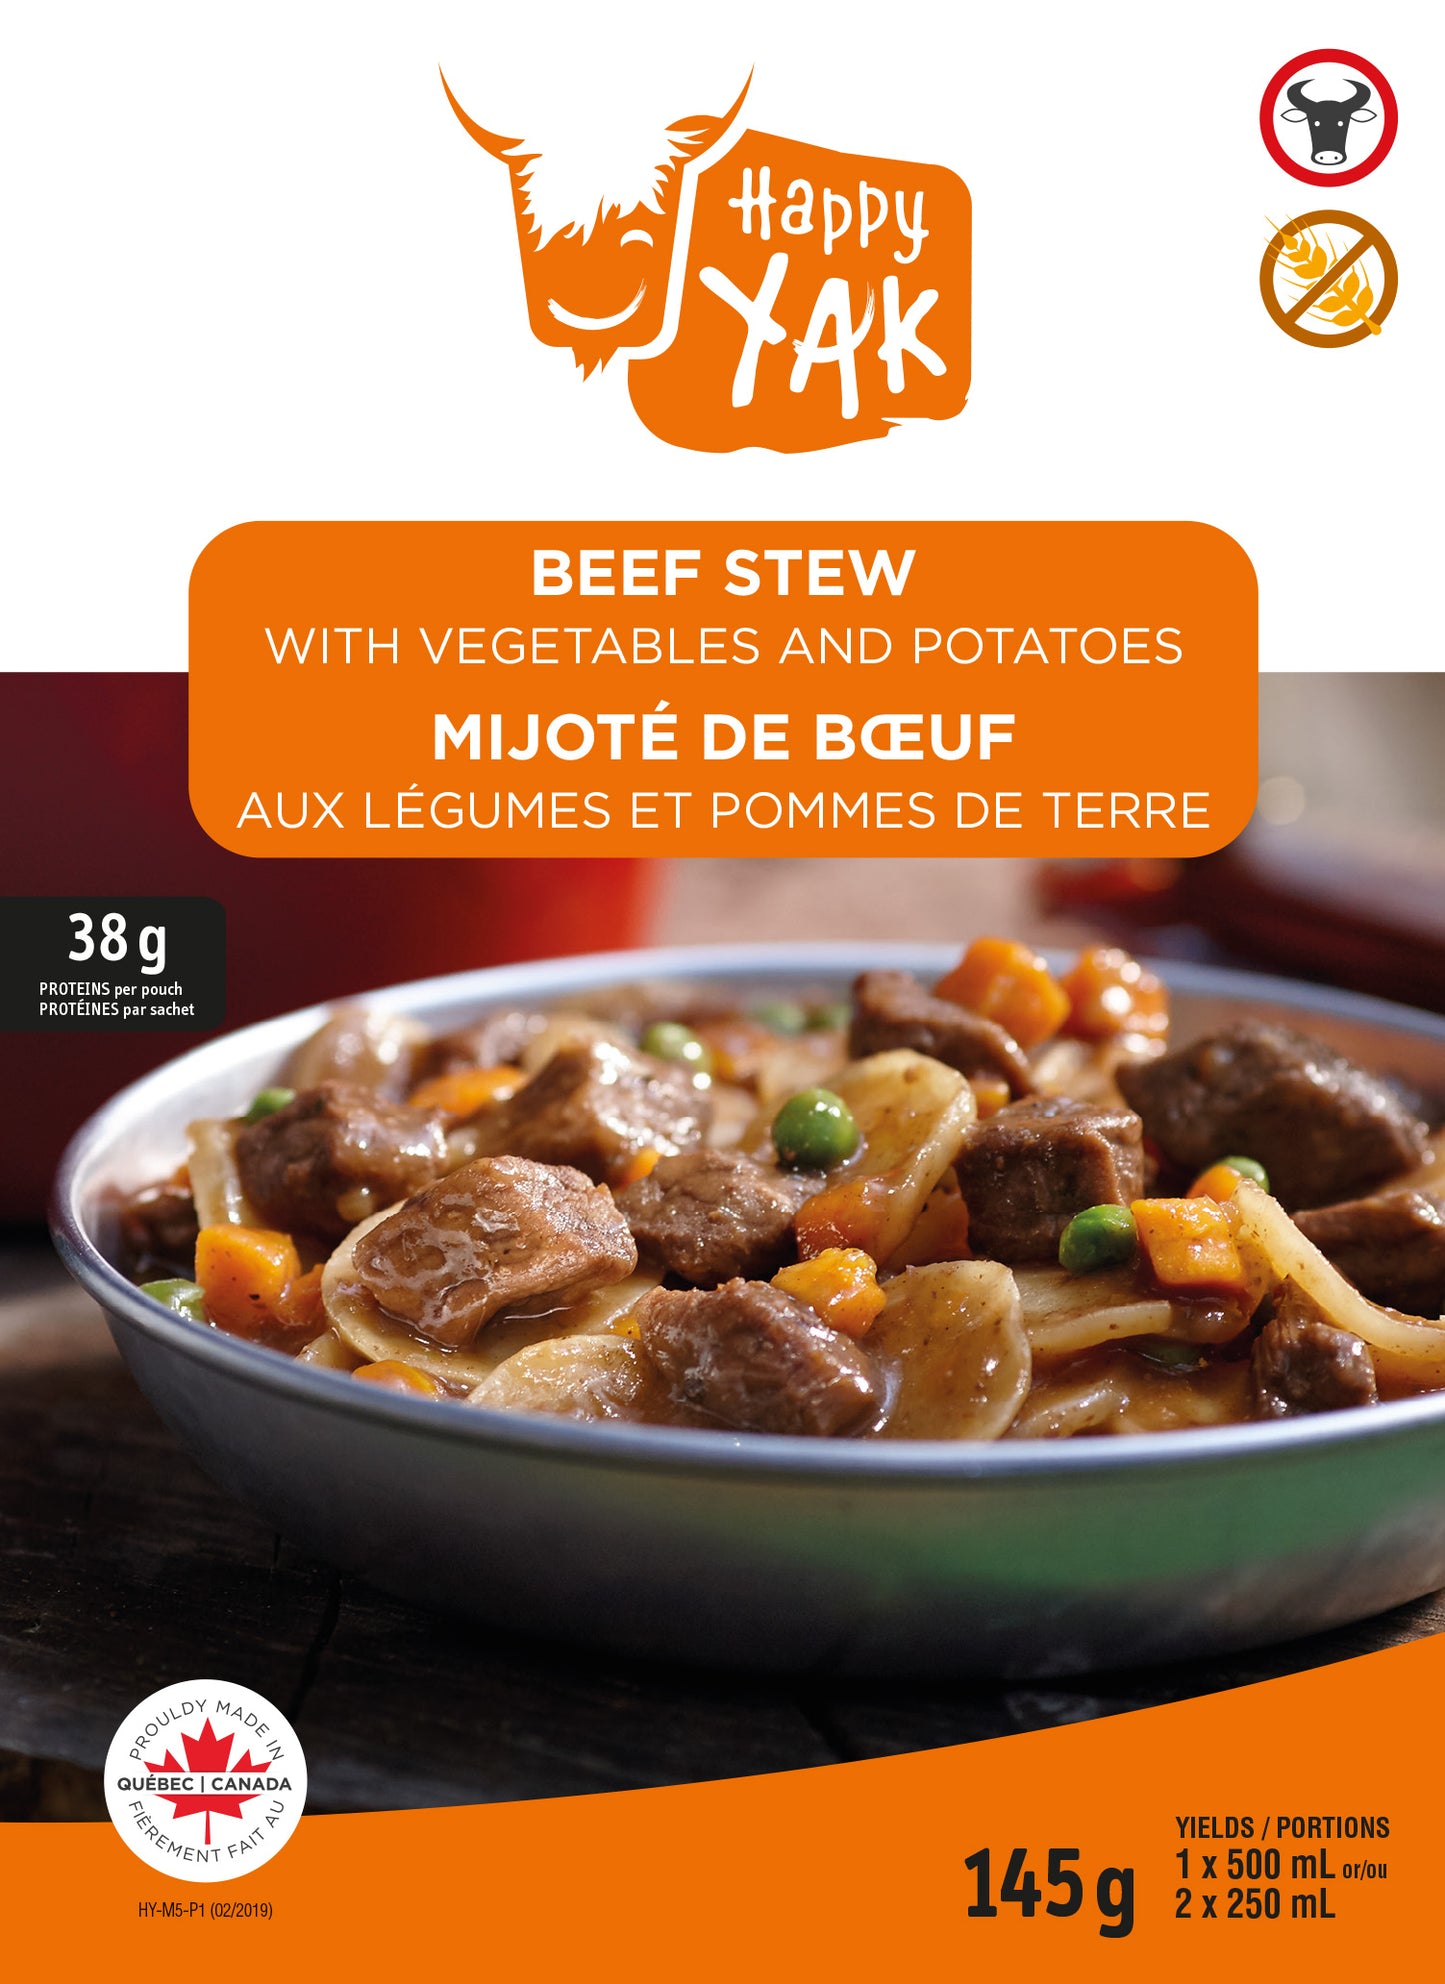 Happy Yak Beef Stew with Vegetables and Potatoes (Gluten Free)*